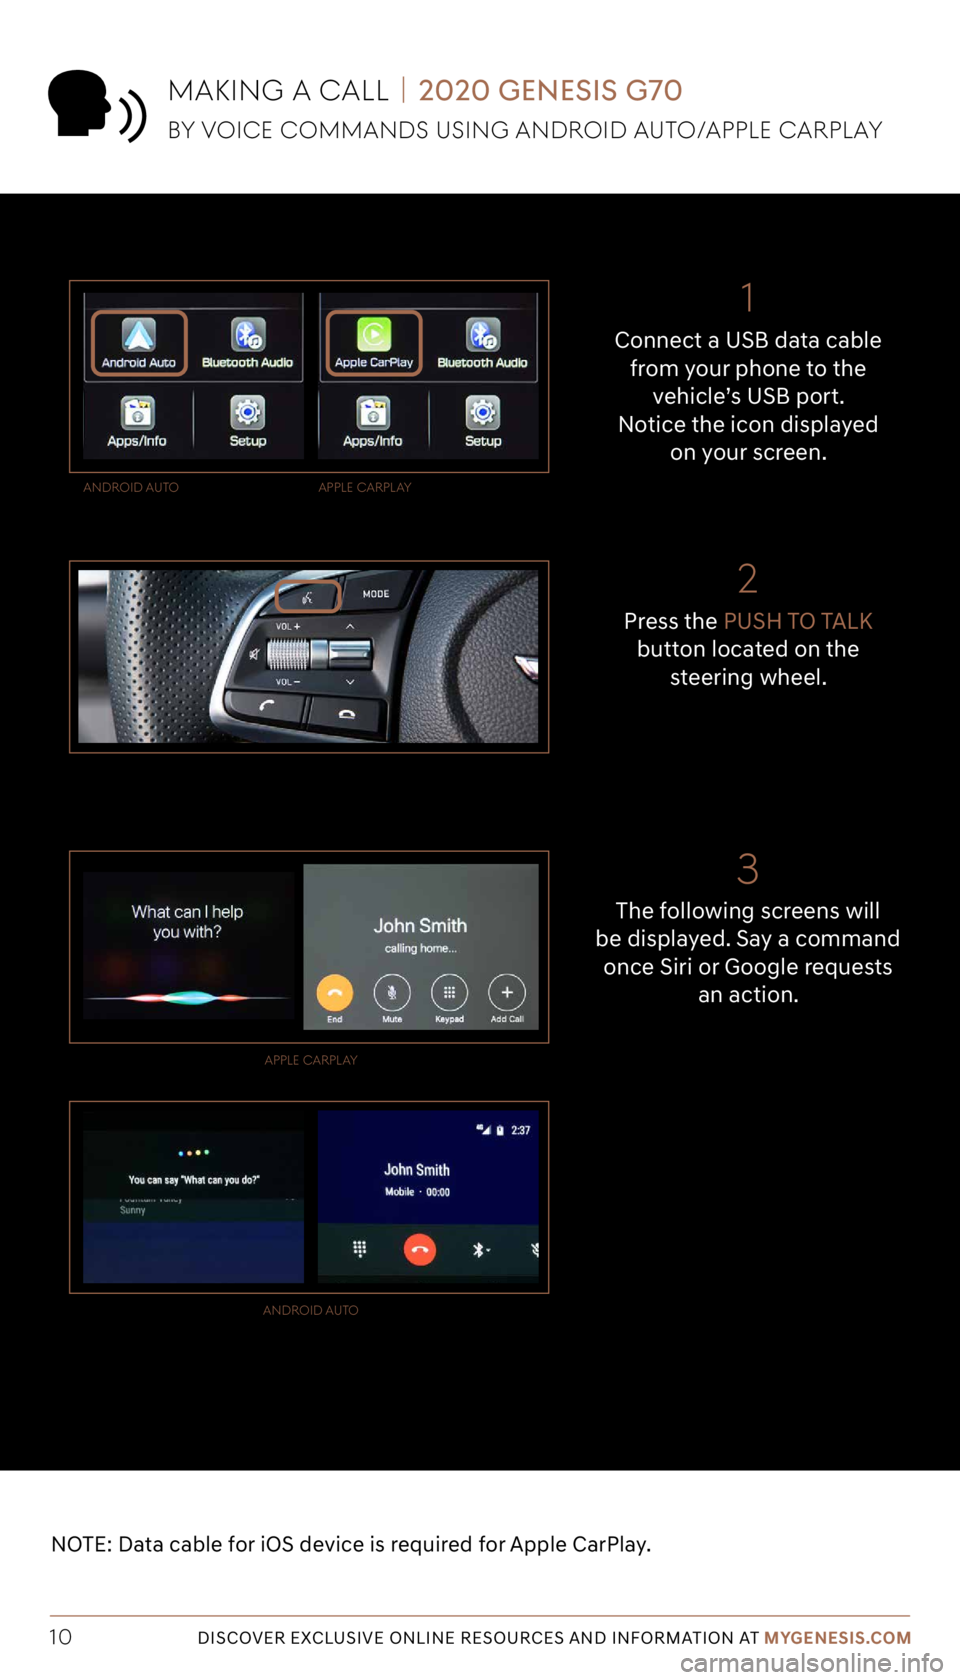 GENESIS G70 2020  Getting Started Guide Tier 1 – VDS Icons
Voice
Activation Bluetooth
TPMSBatter\f Window
\befog 1 Window
\befog 2
App ClockSteering
Adjustments Light
Gear
Seat 
Adjusting Air
Media 1 Fuel
Automatic
Transmission Manual
Tra